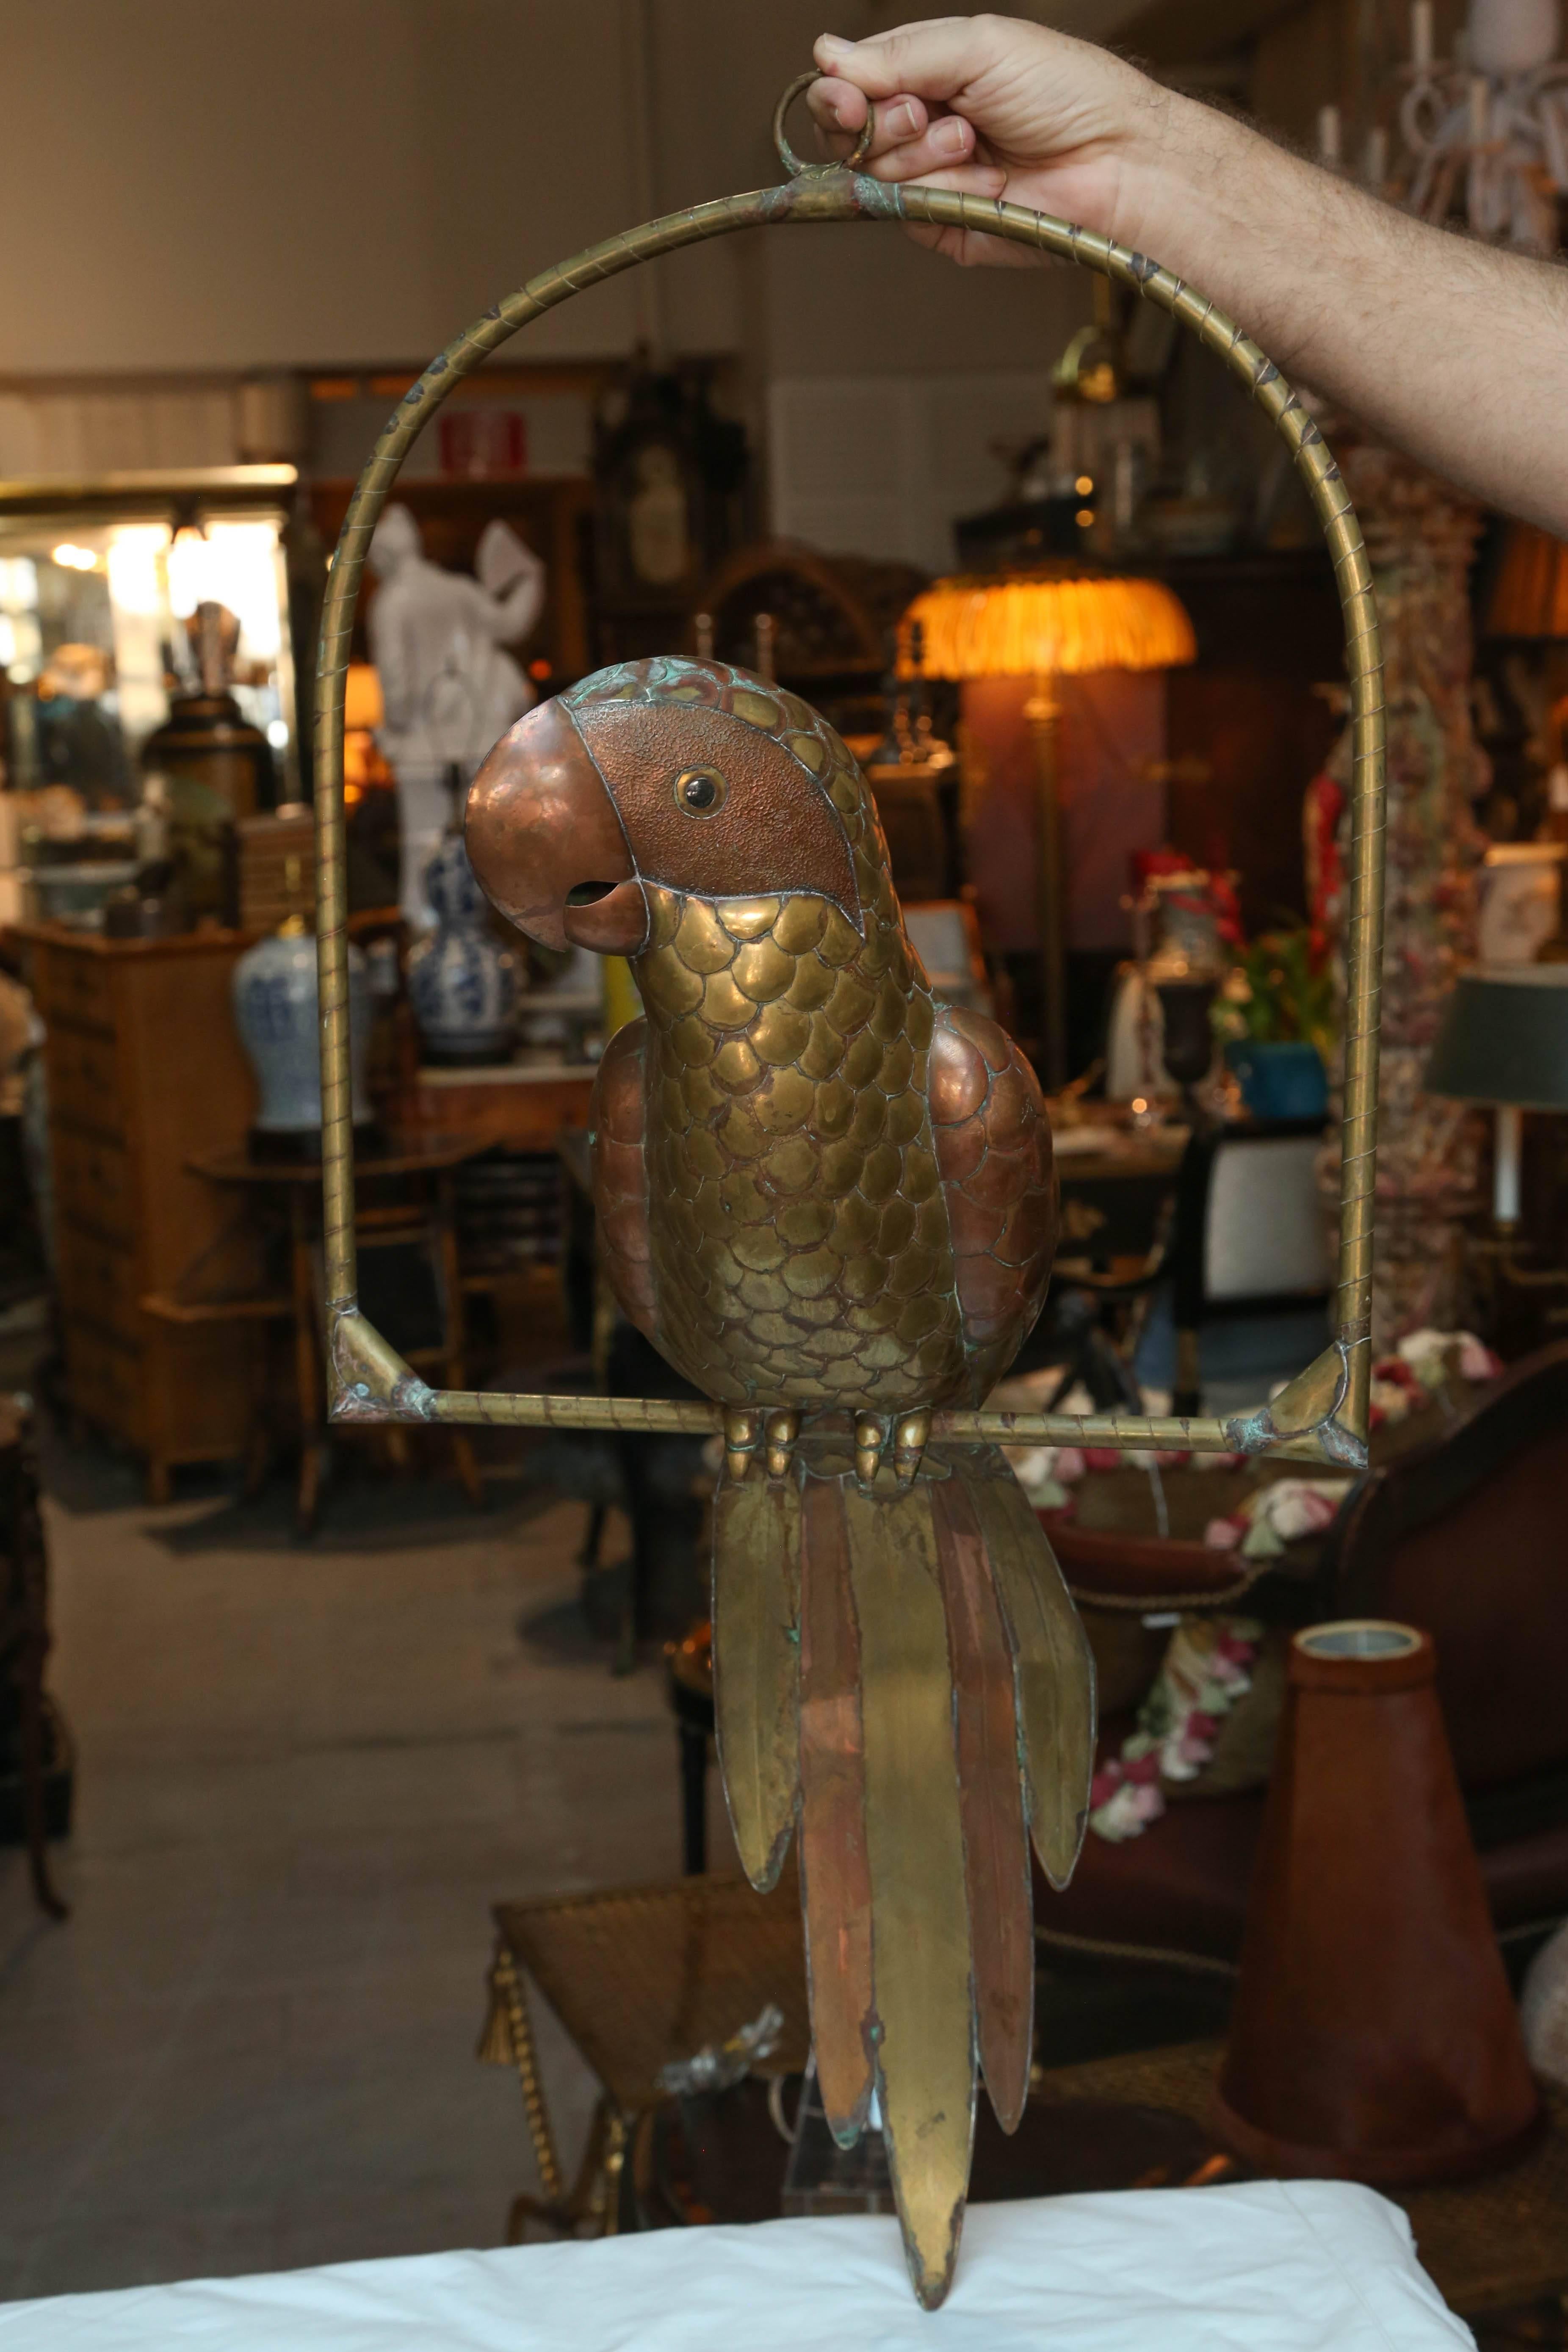 Eye-catching scale, a fine whimsical brass and copper rendition appointed with glass eyes.